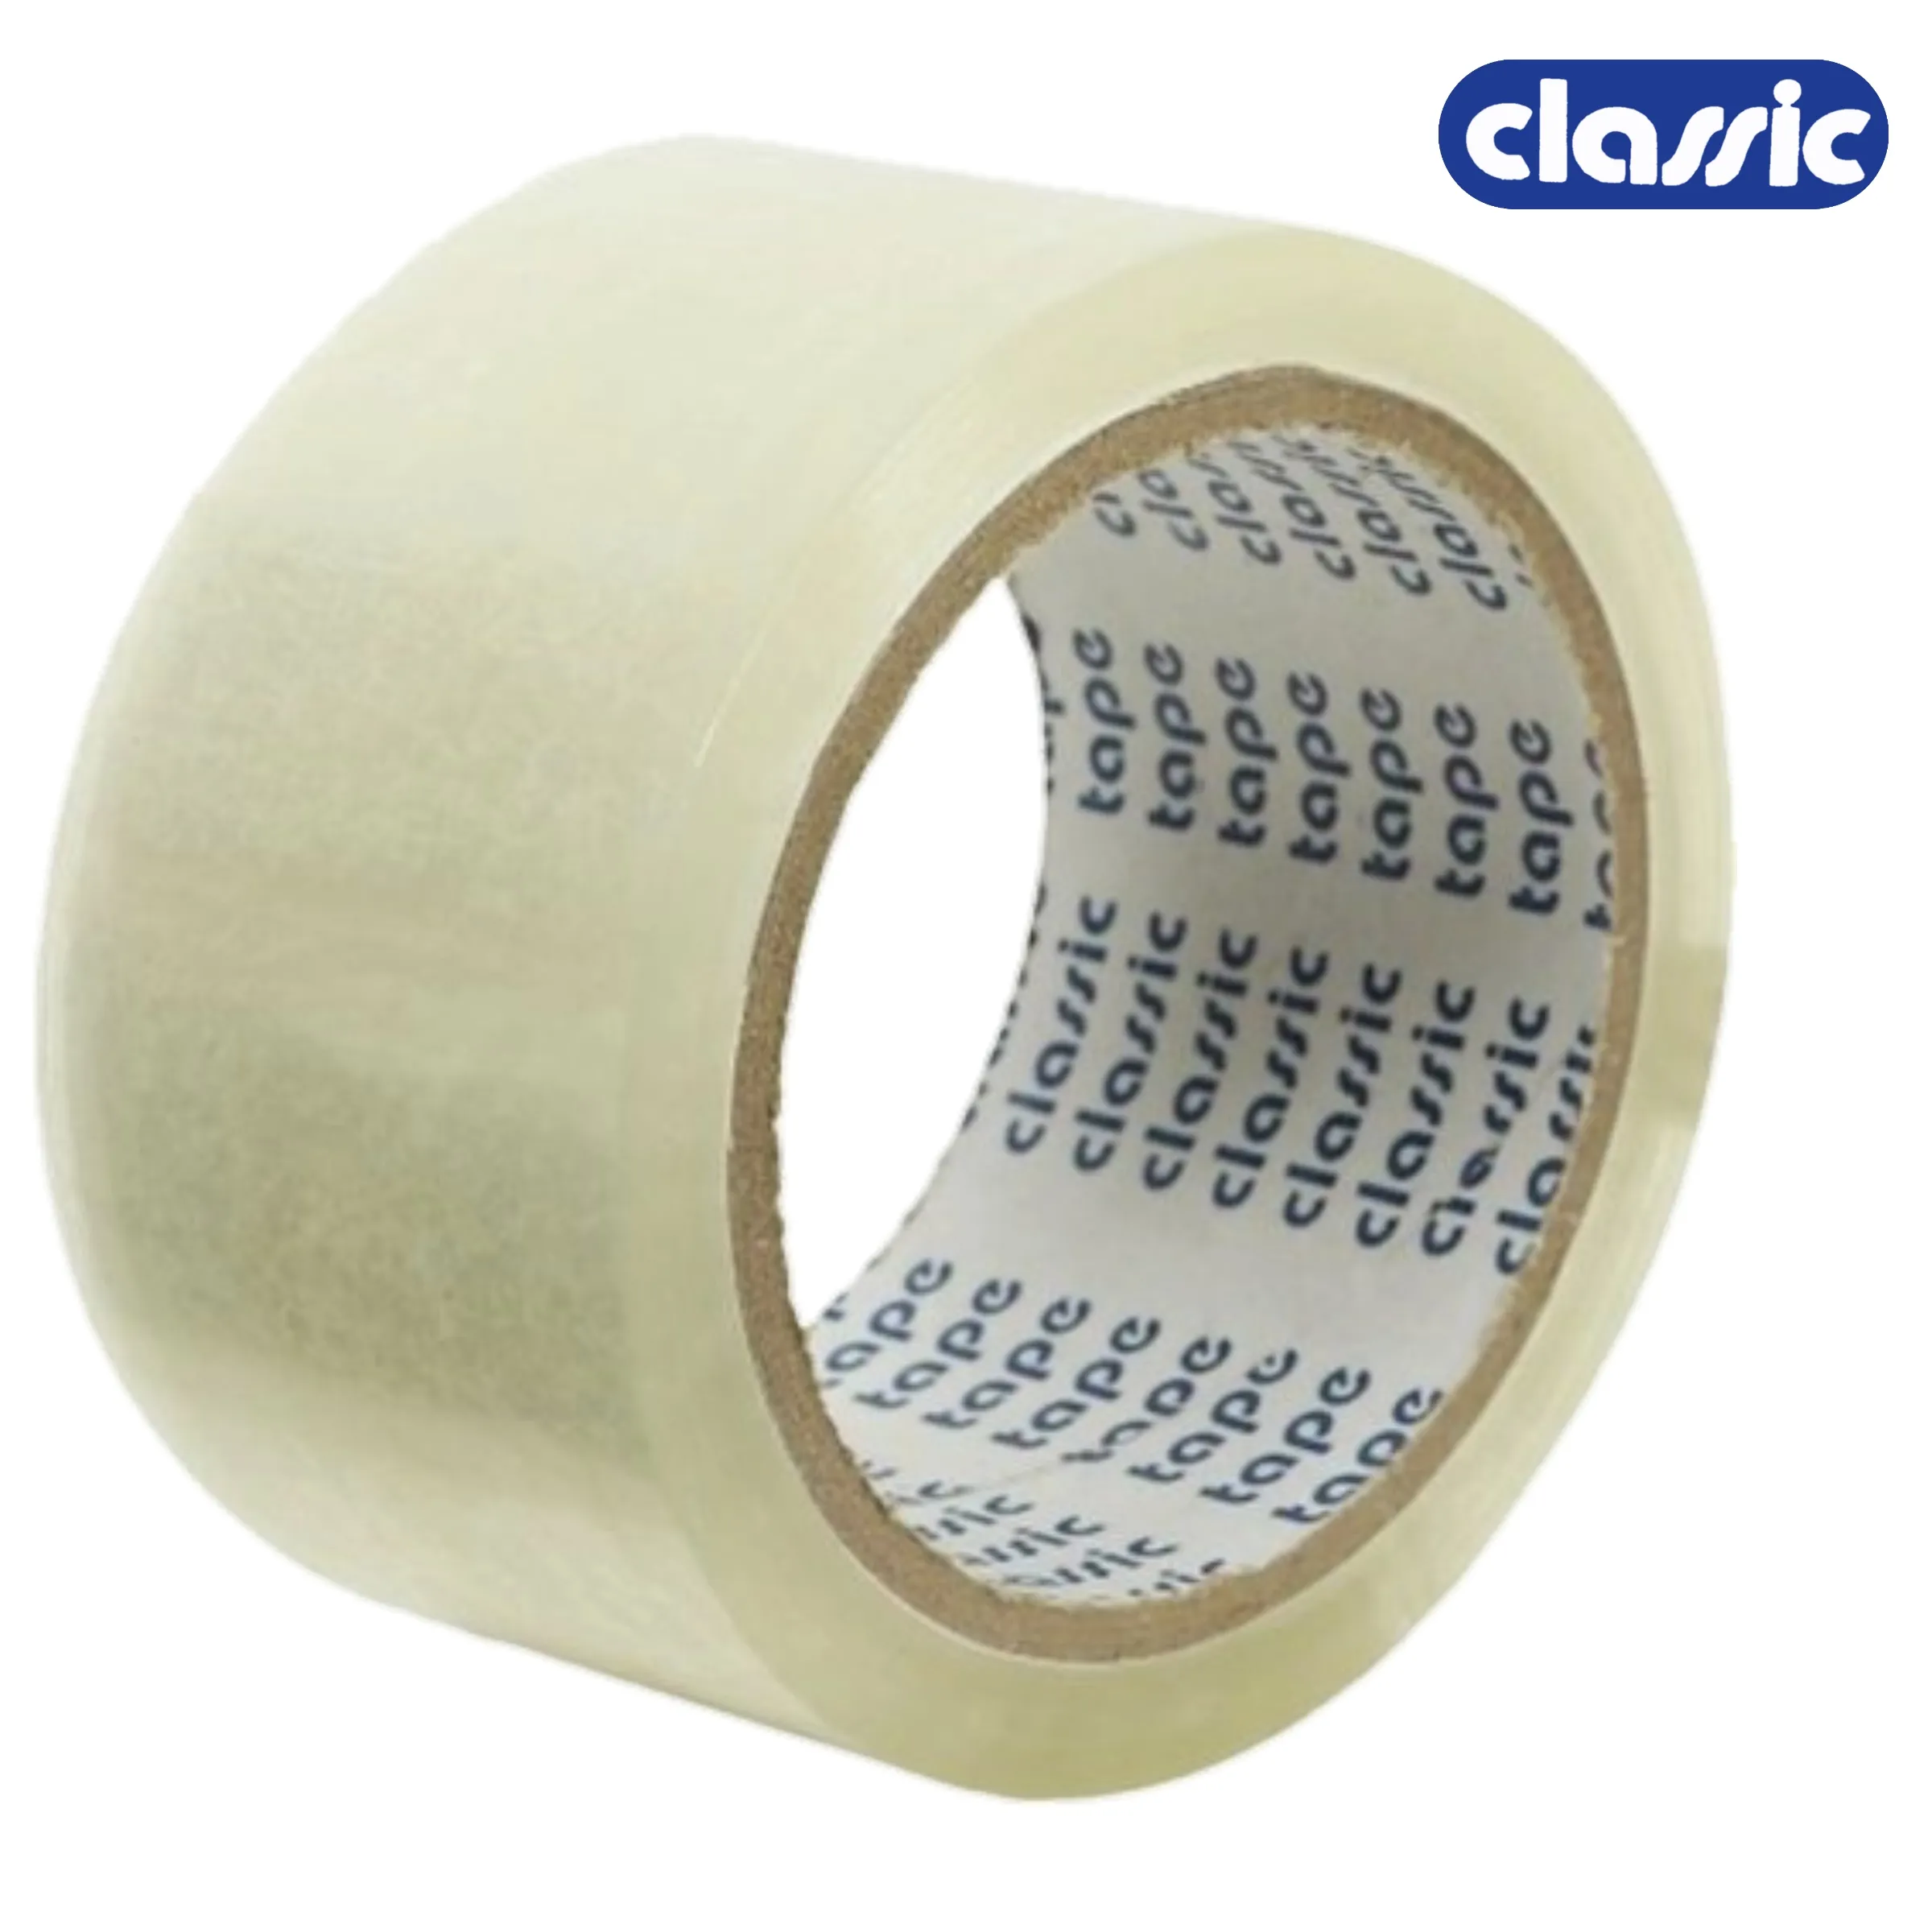 Classic 30 Micron 48 mm/2 Inch Transparent Self Adhesive Tape, Premium Quality, 1 Pack of 6 Roll